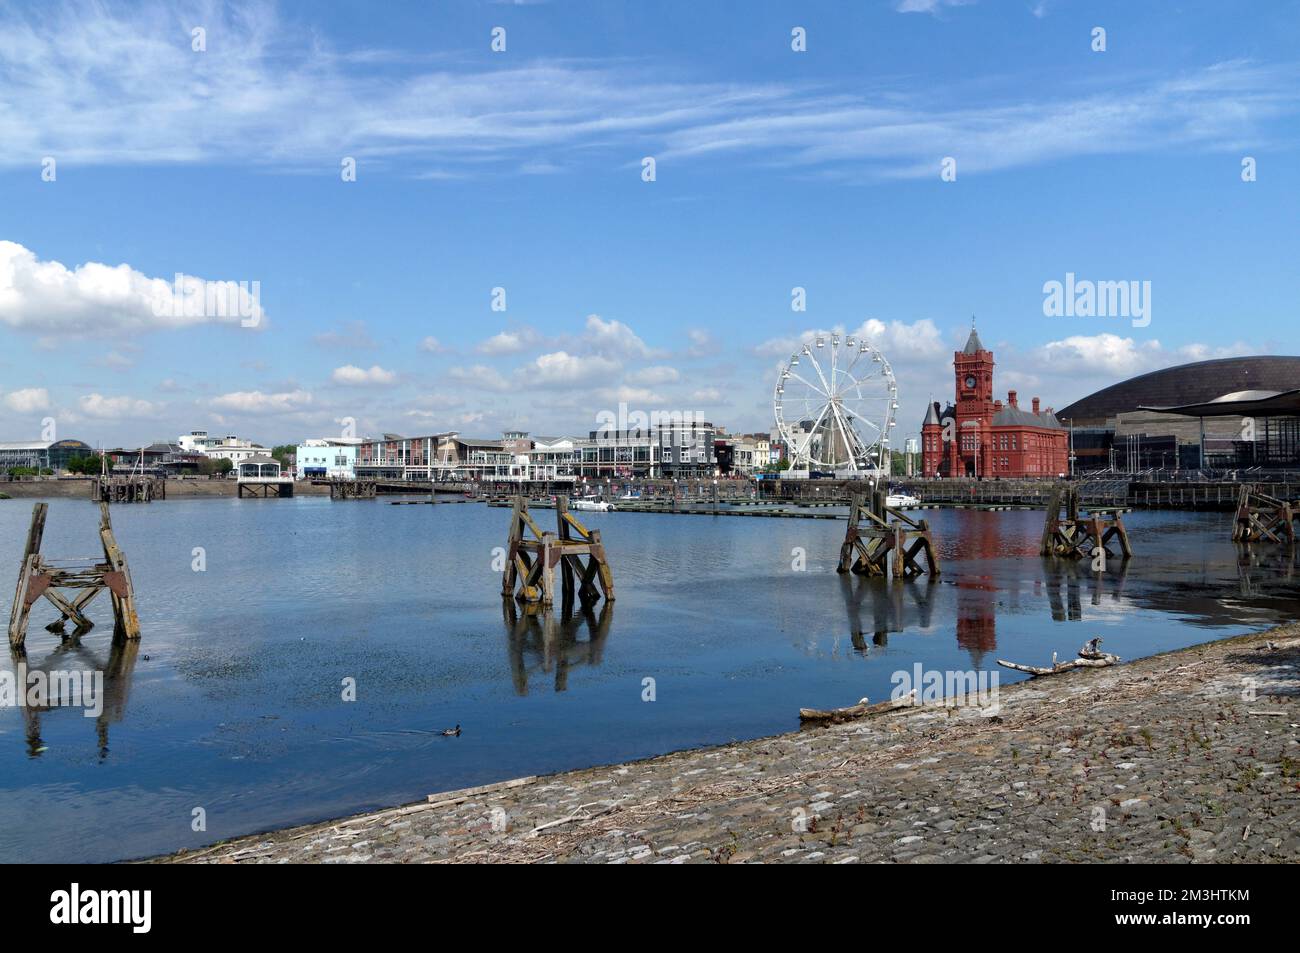 Cardiff Bay, Mermaid Quay and Pierhead building with old wooden 'dolphins' mooring platforms from the old docks in the foreground.. Taken 2022 Stock Photo